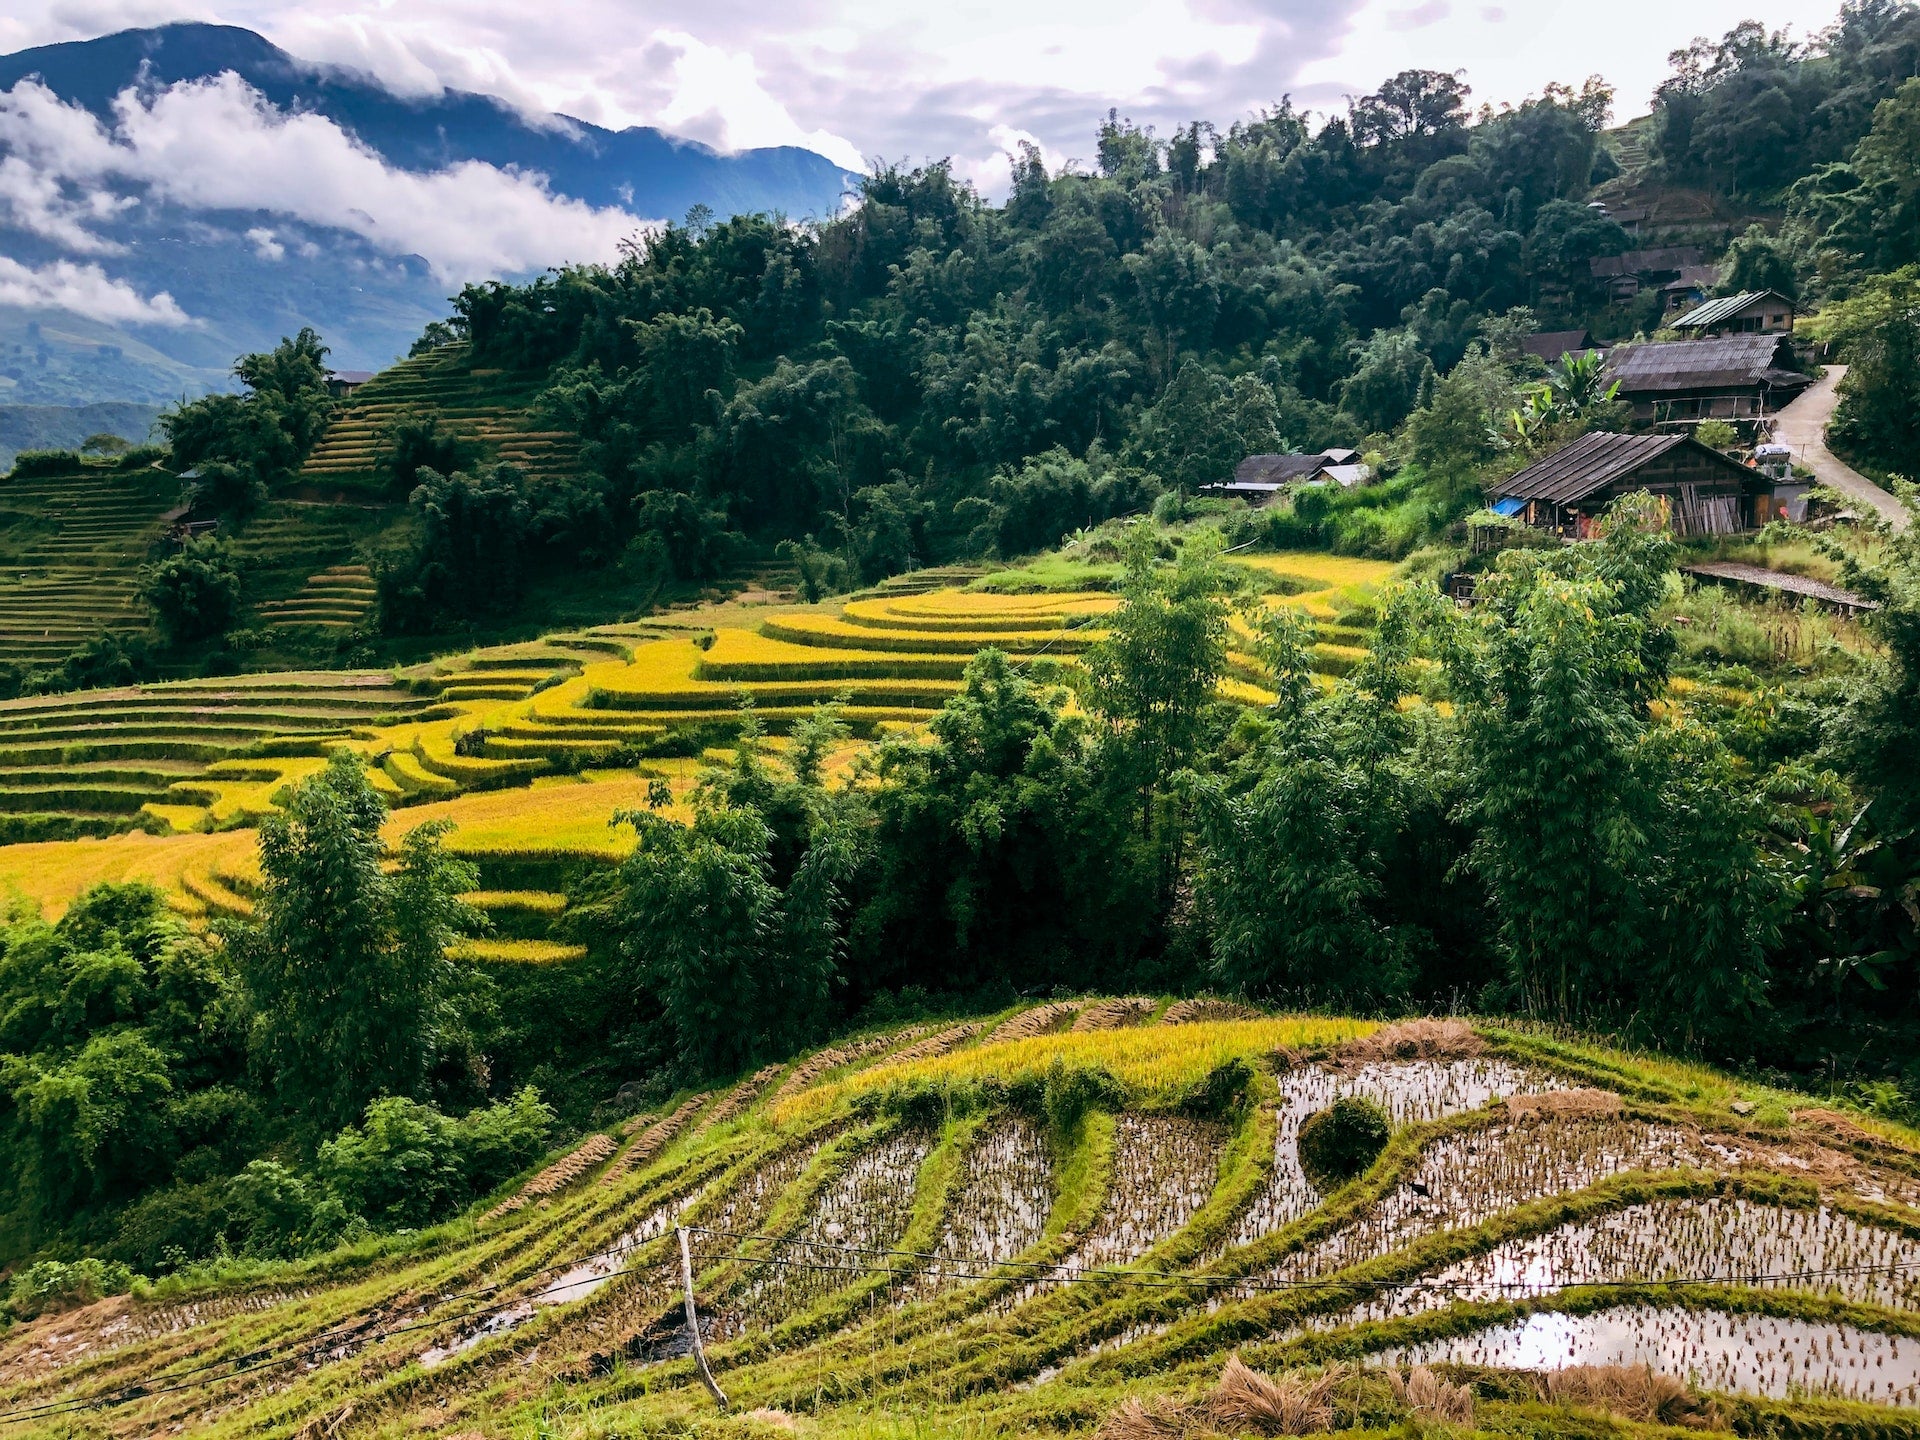 A scenic photo of rice fields in Vietnam